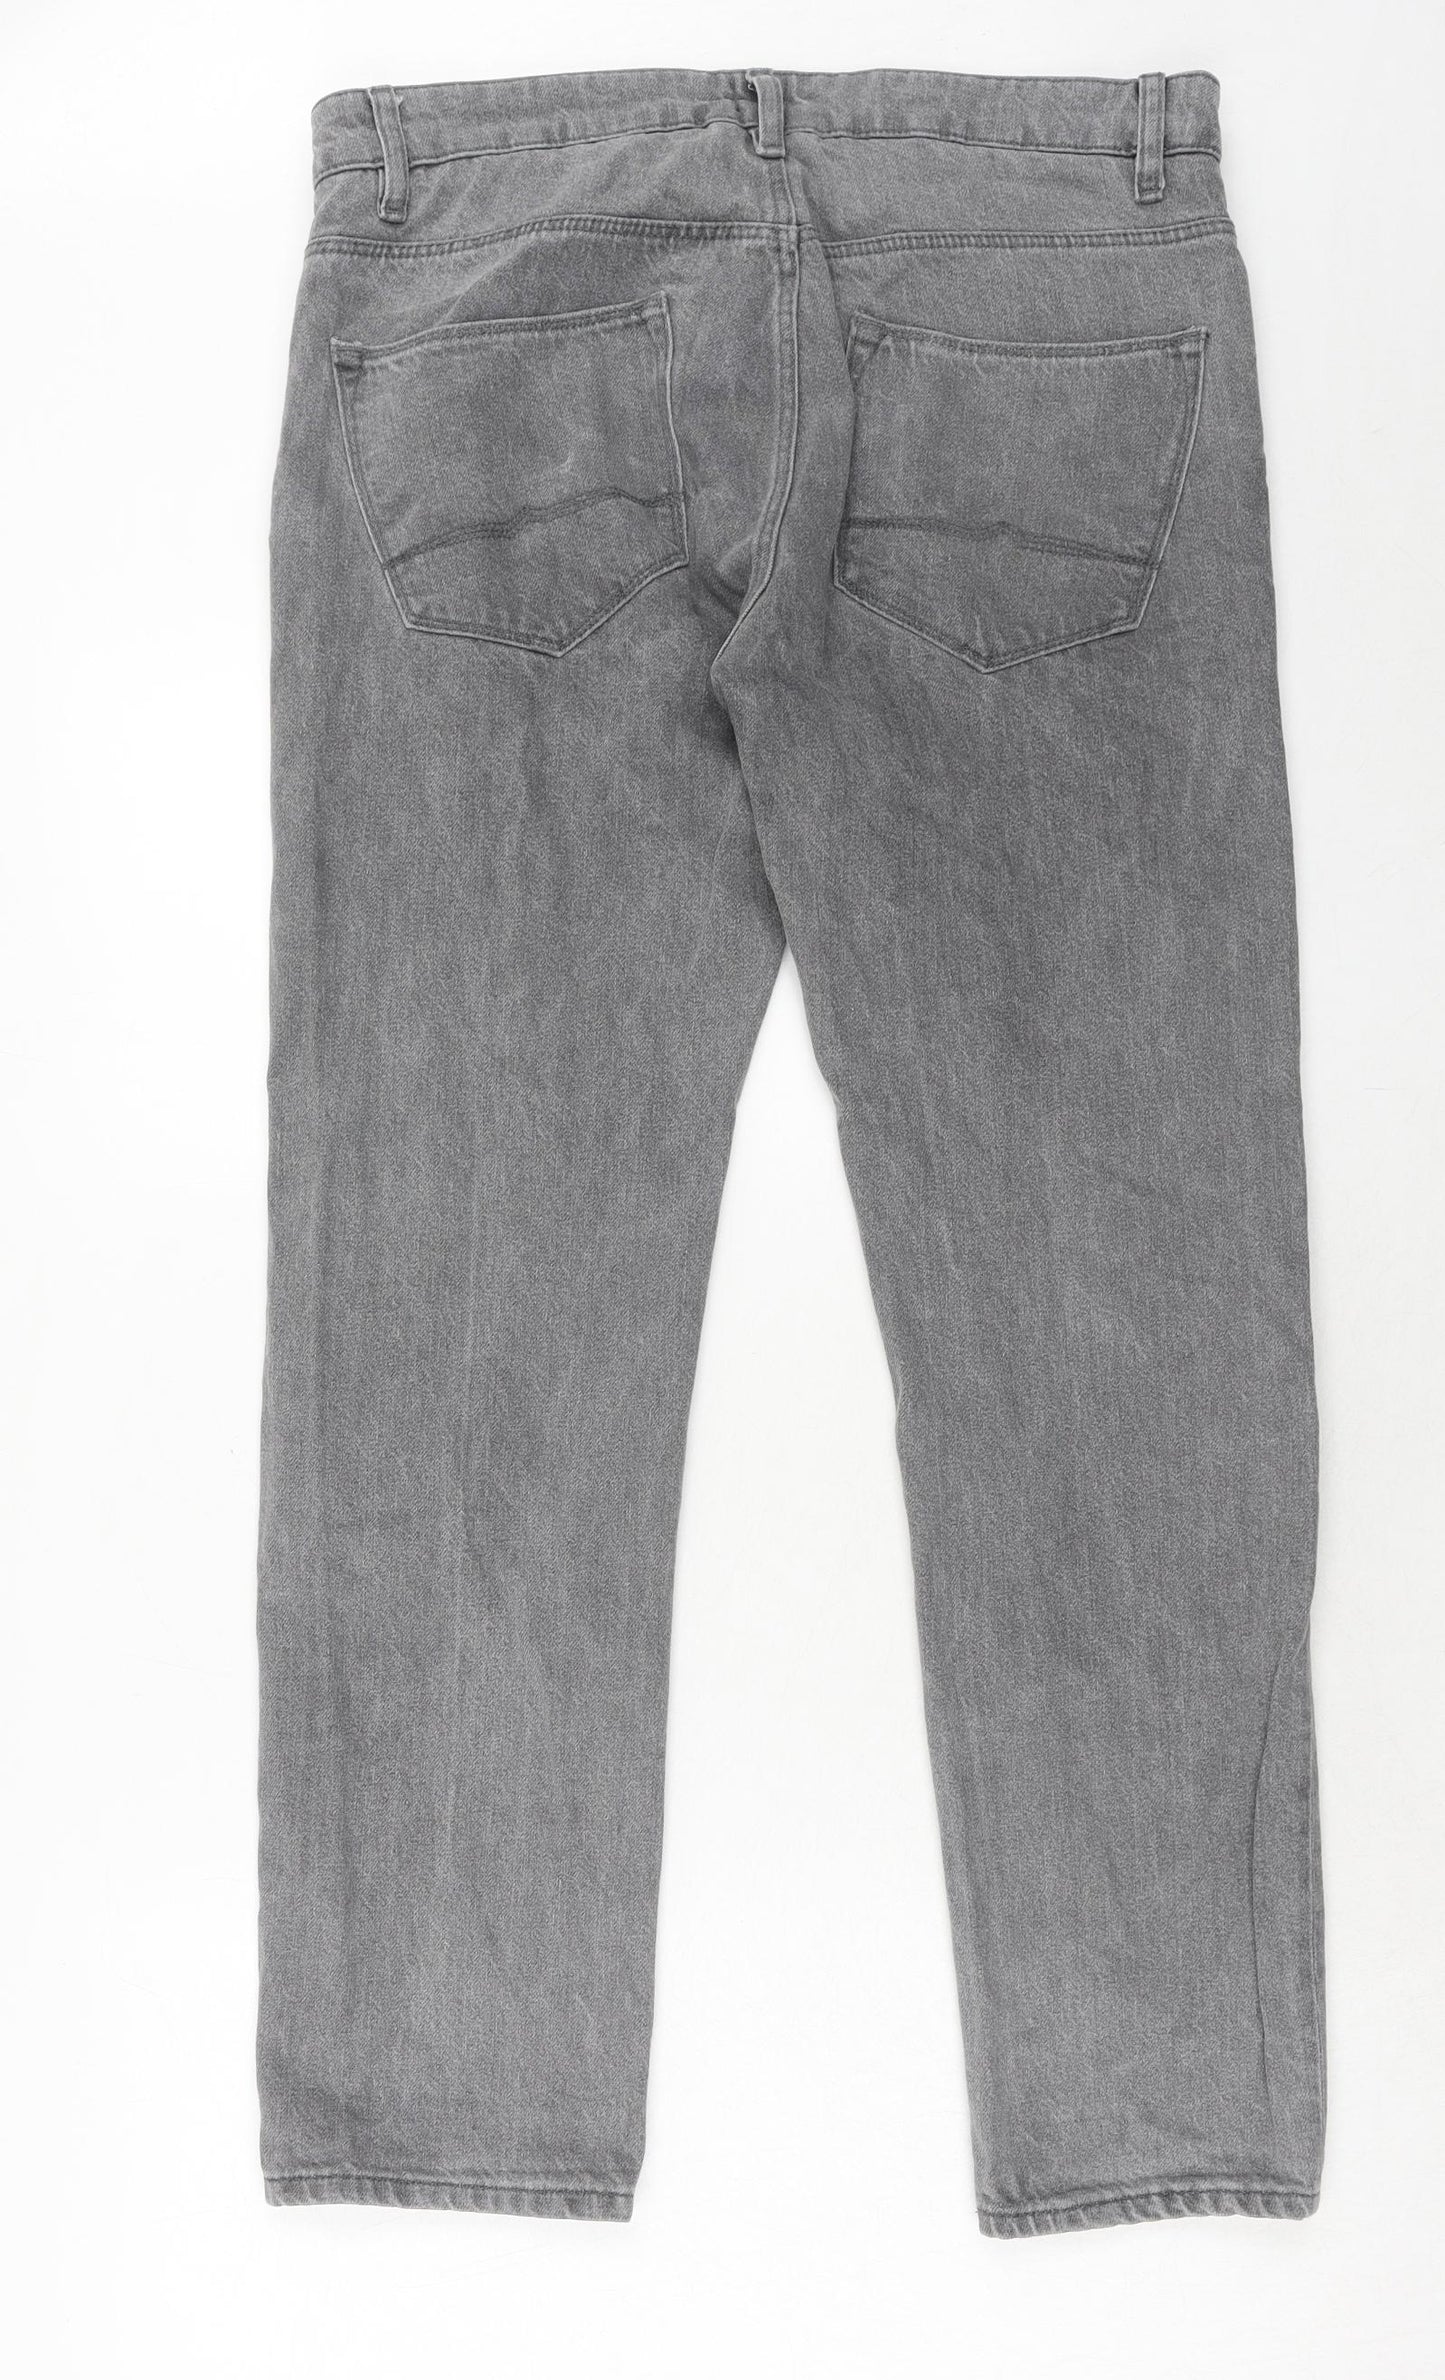 ASOS Mens Grey Cotton Straight Jeans Size 33 in Regular Button